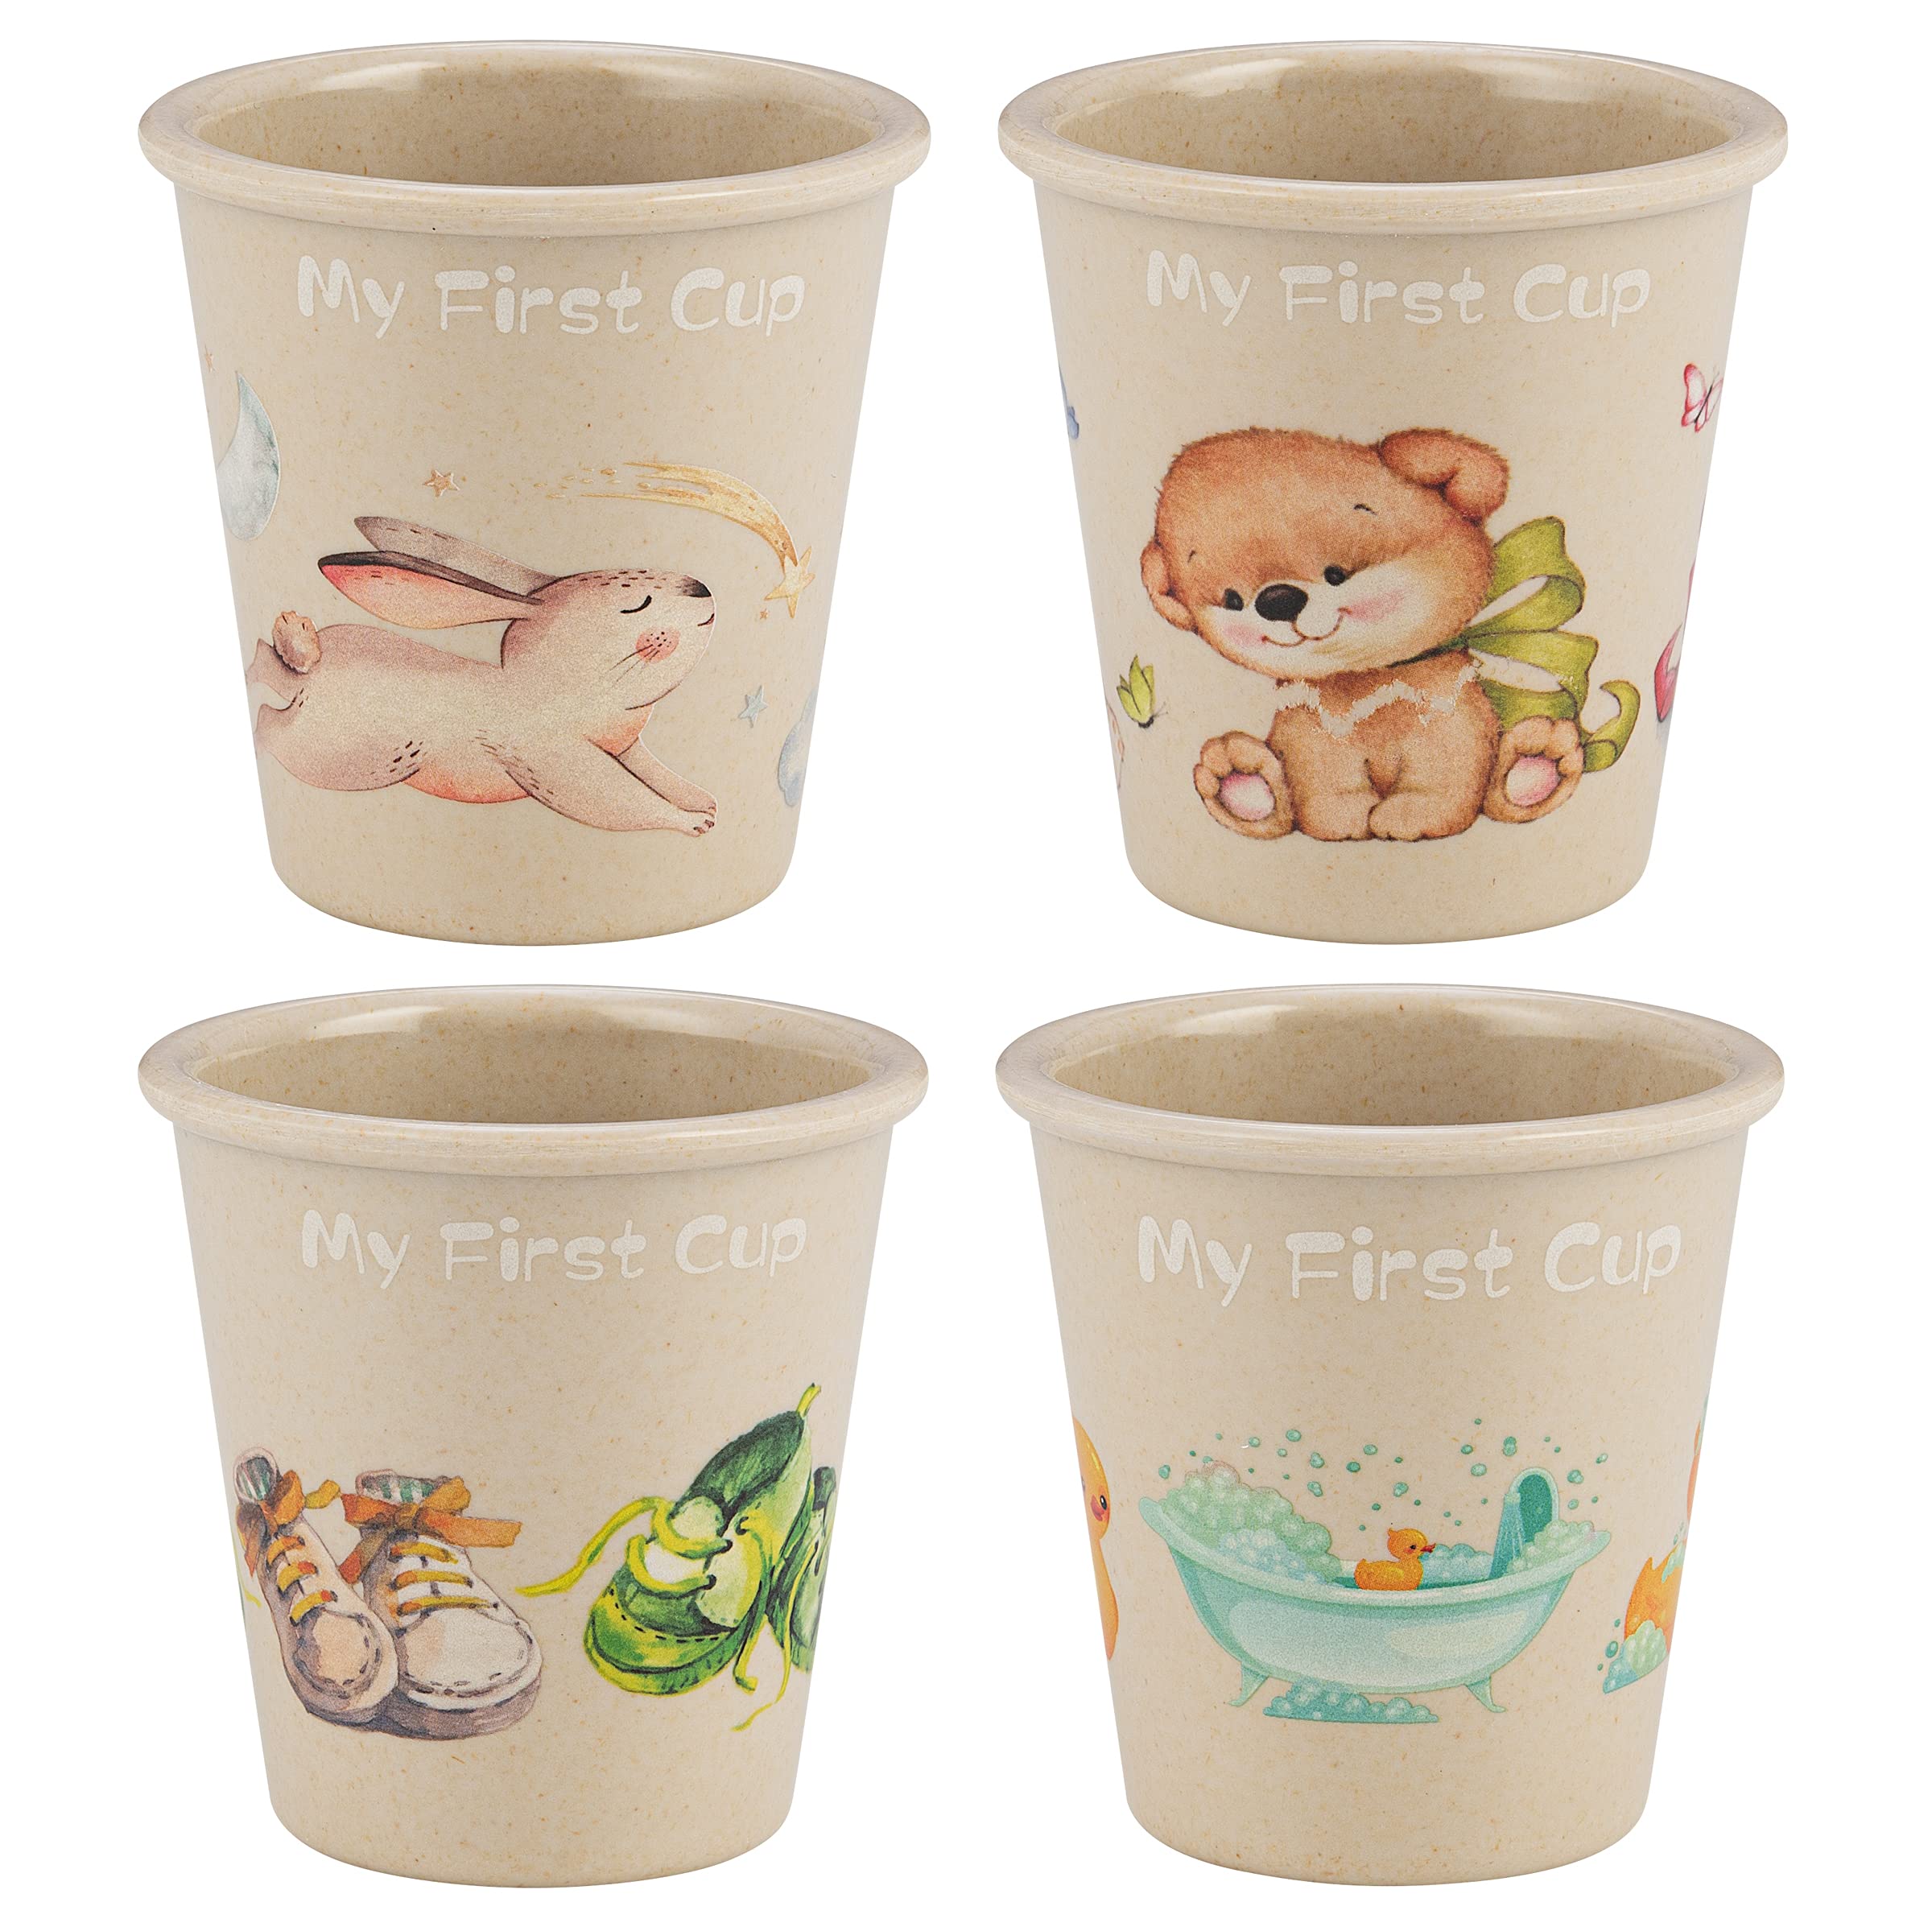 WeeSprout Bamboo Toddler Cups - 4 PC Set (10 fl oz), Organic & Non-Plastic Cup Pack for Toddlers, Big Kids or Baby, Natural